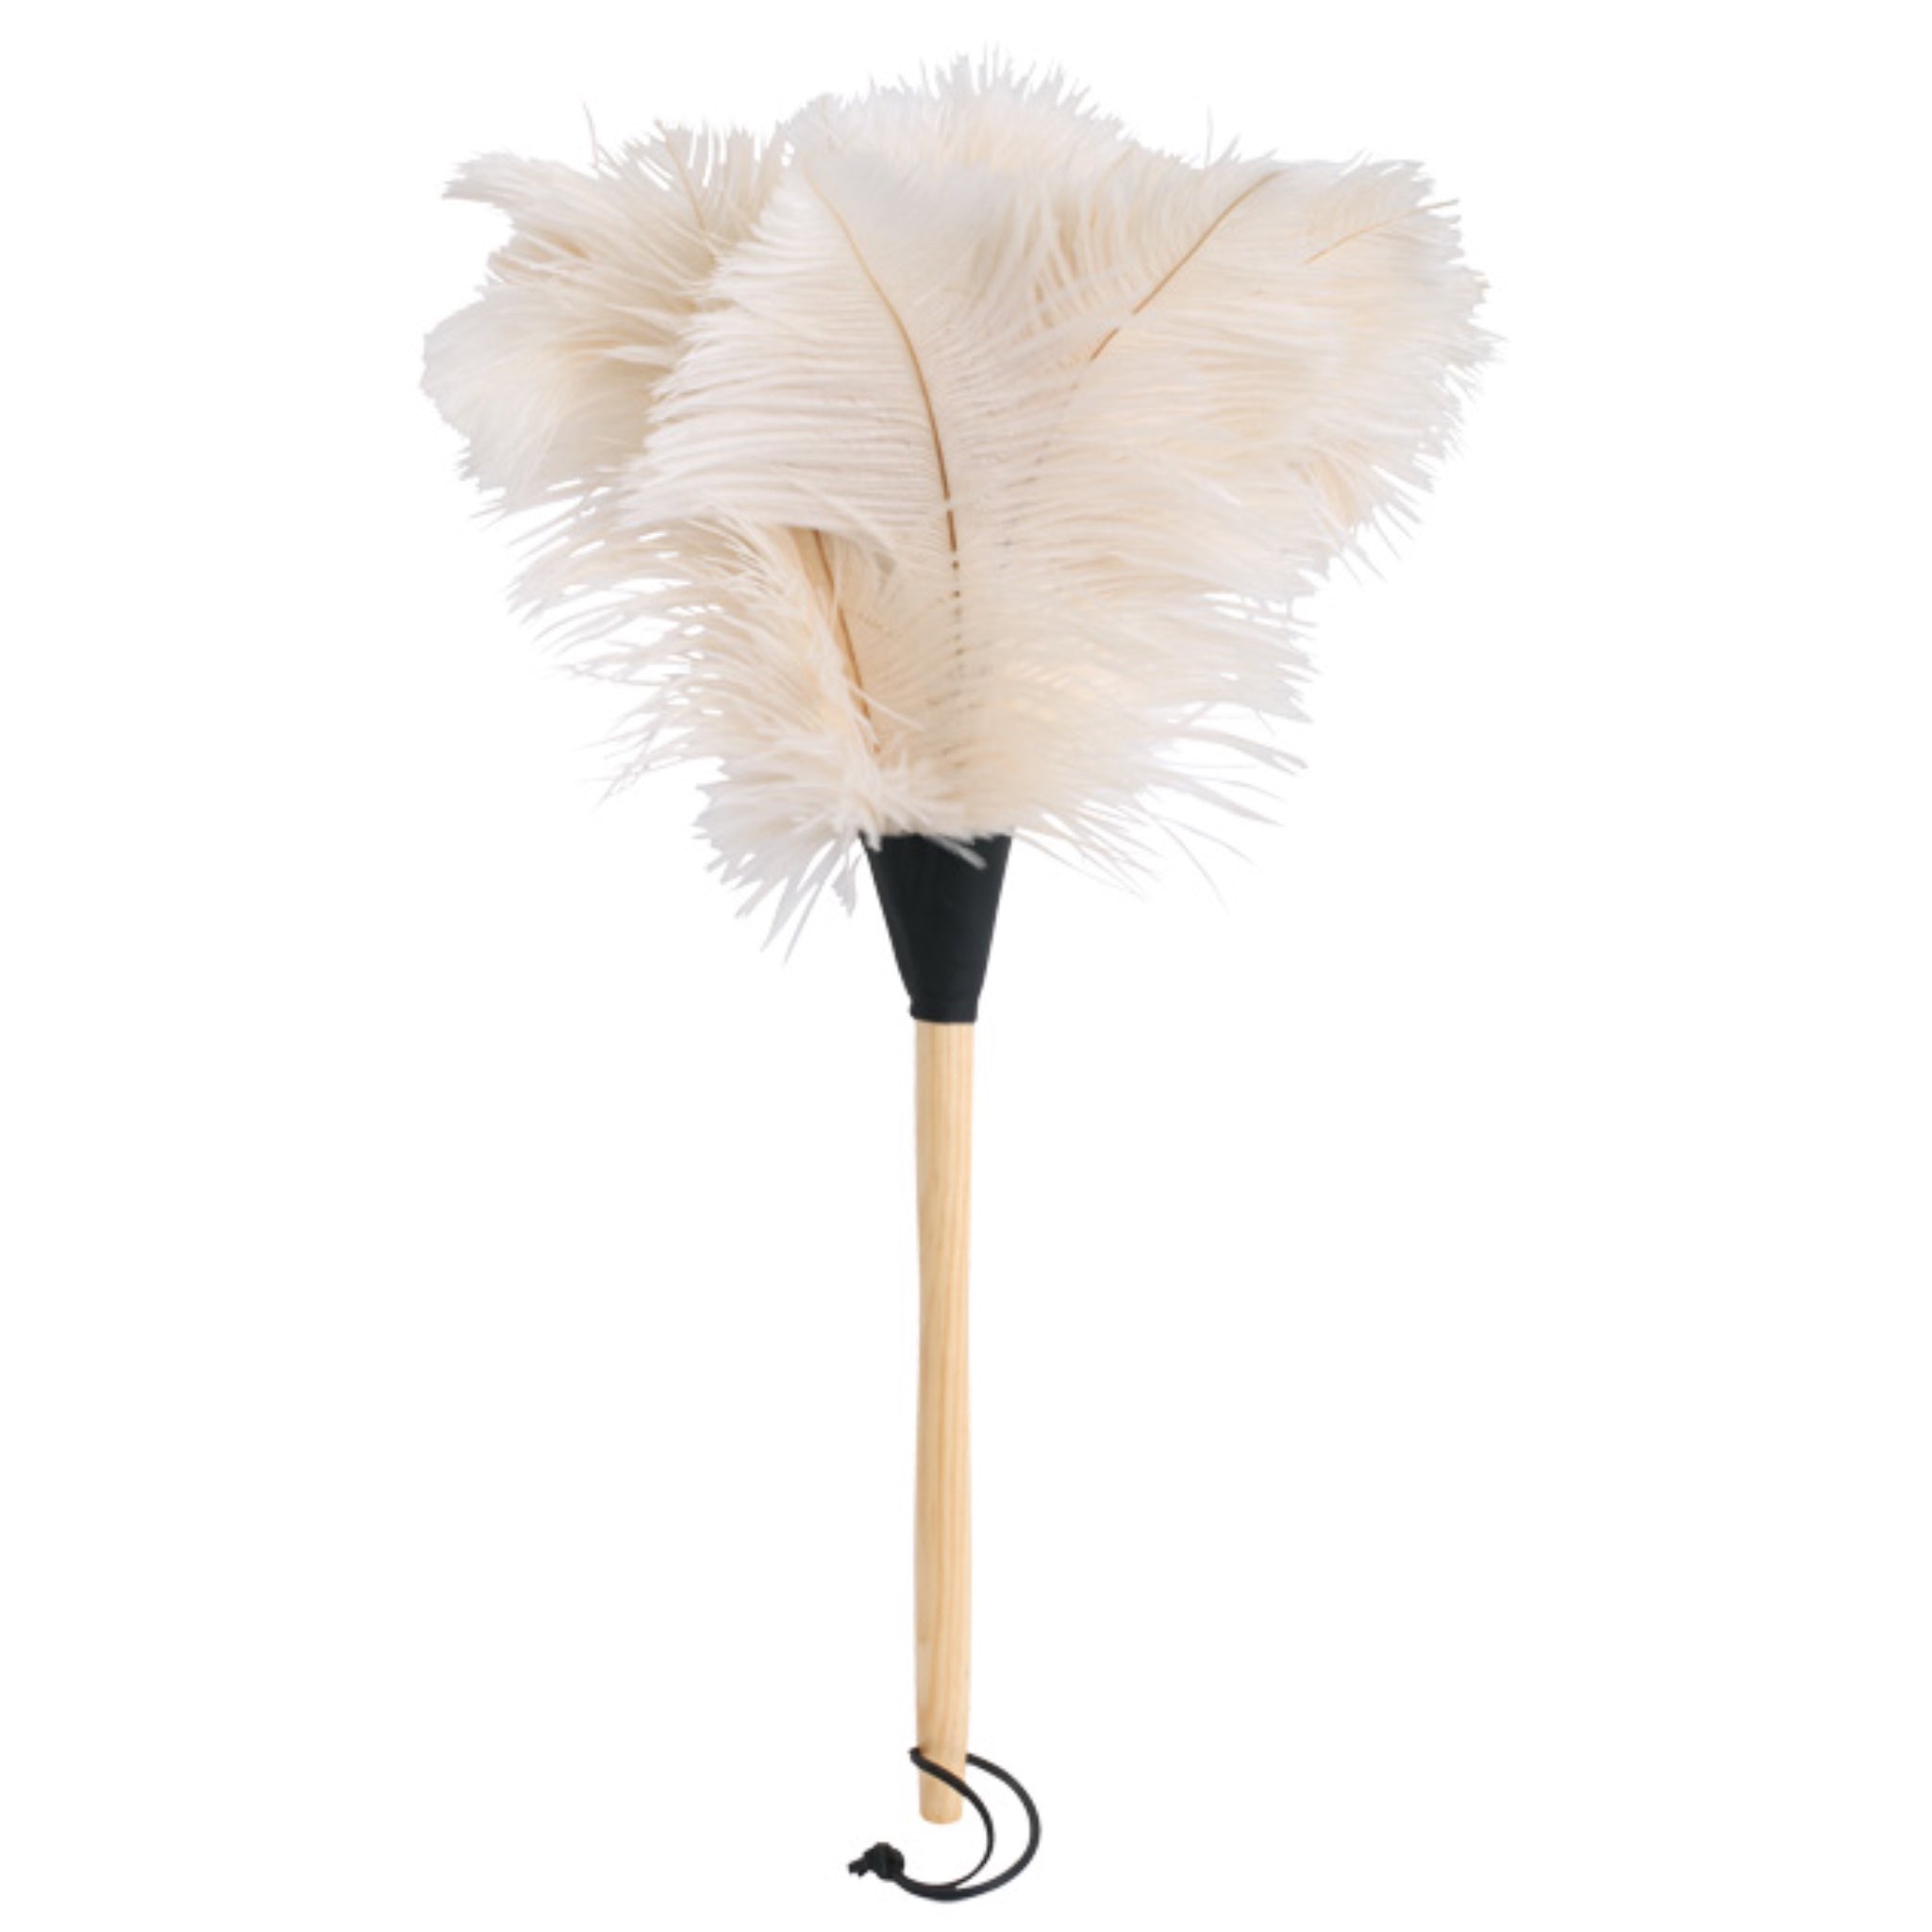 DUSTER/ Ostrich Feather, 23 – Croaker, Inc